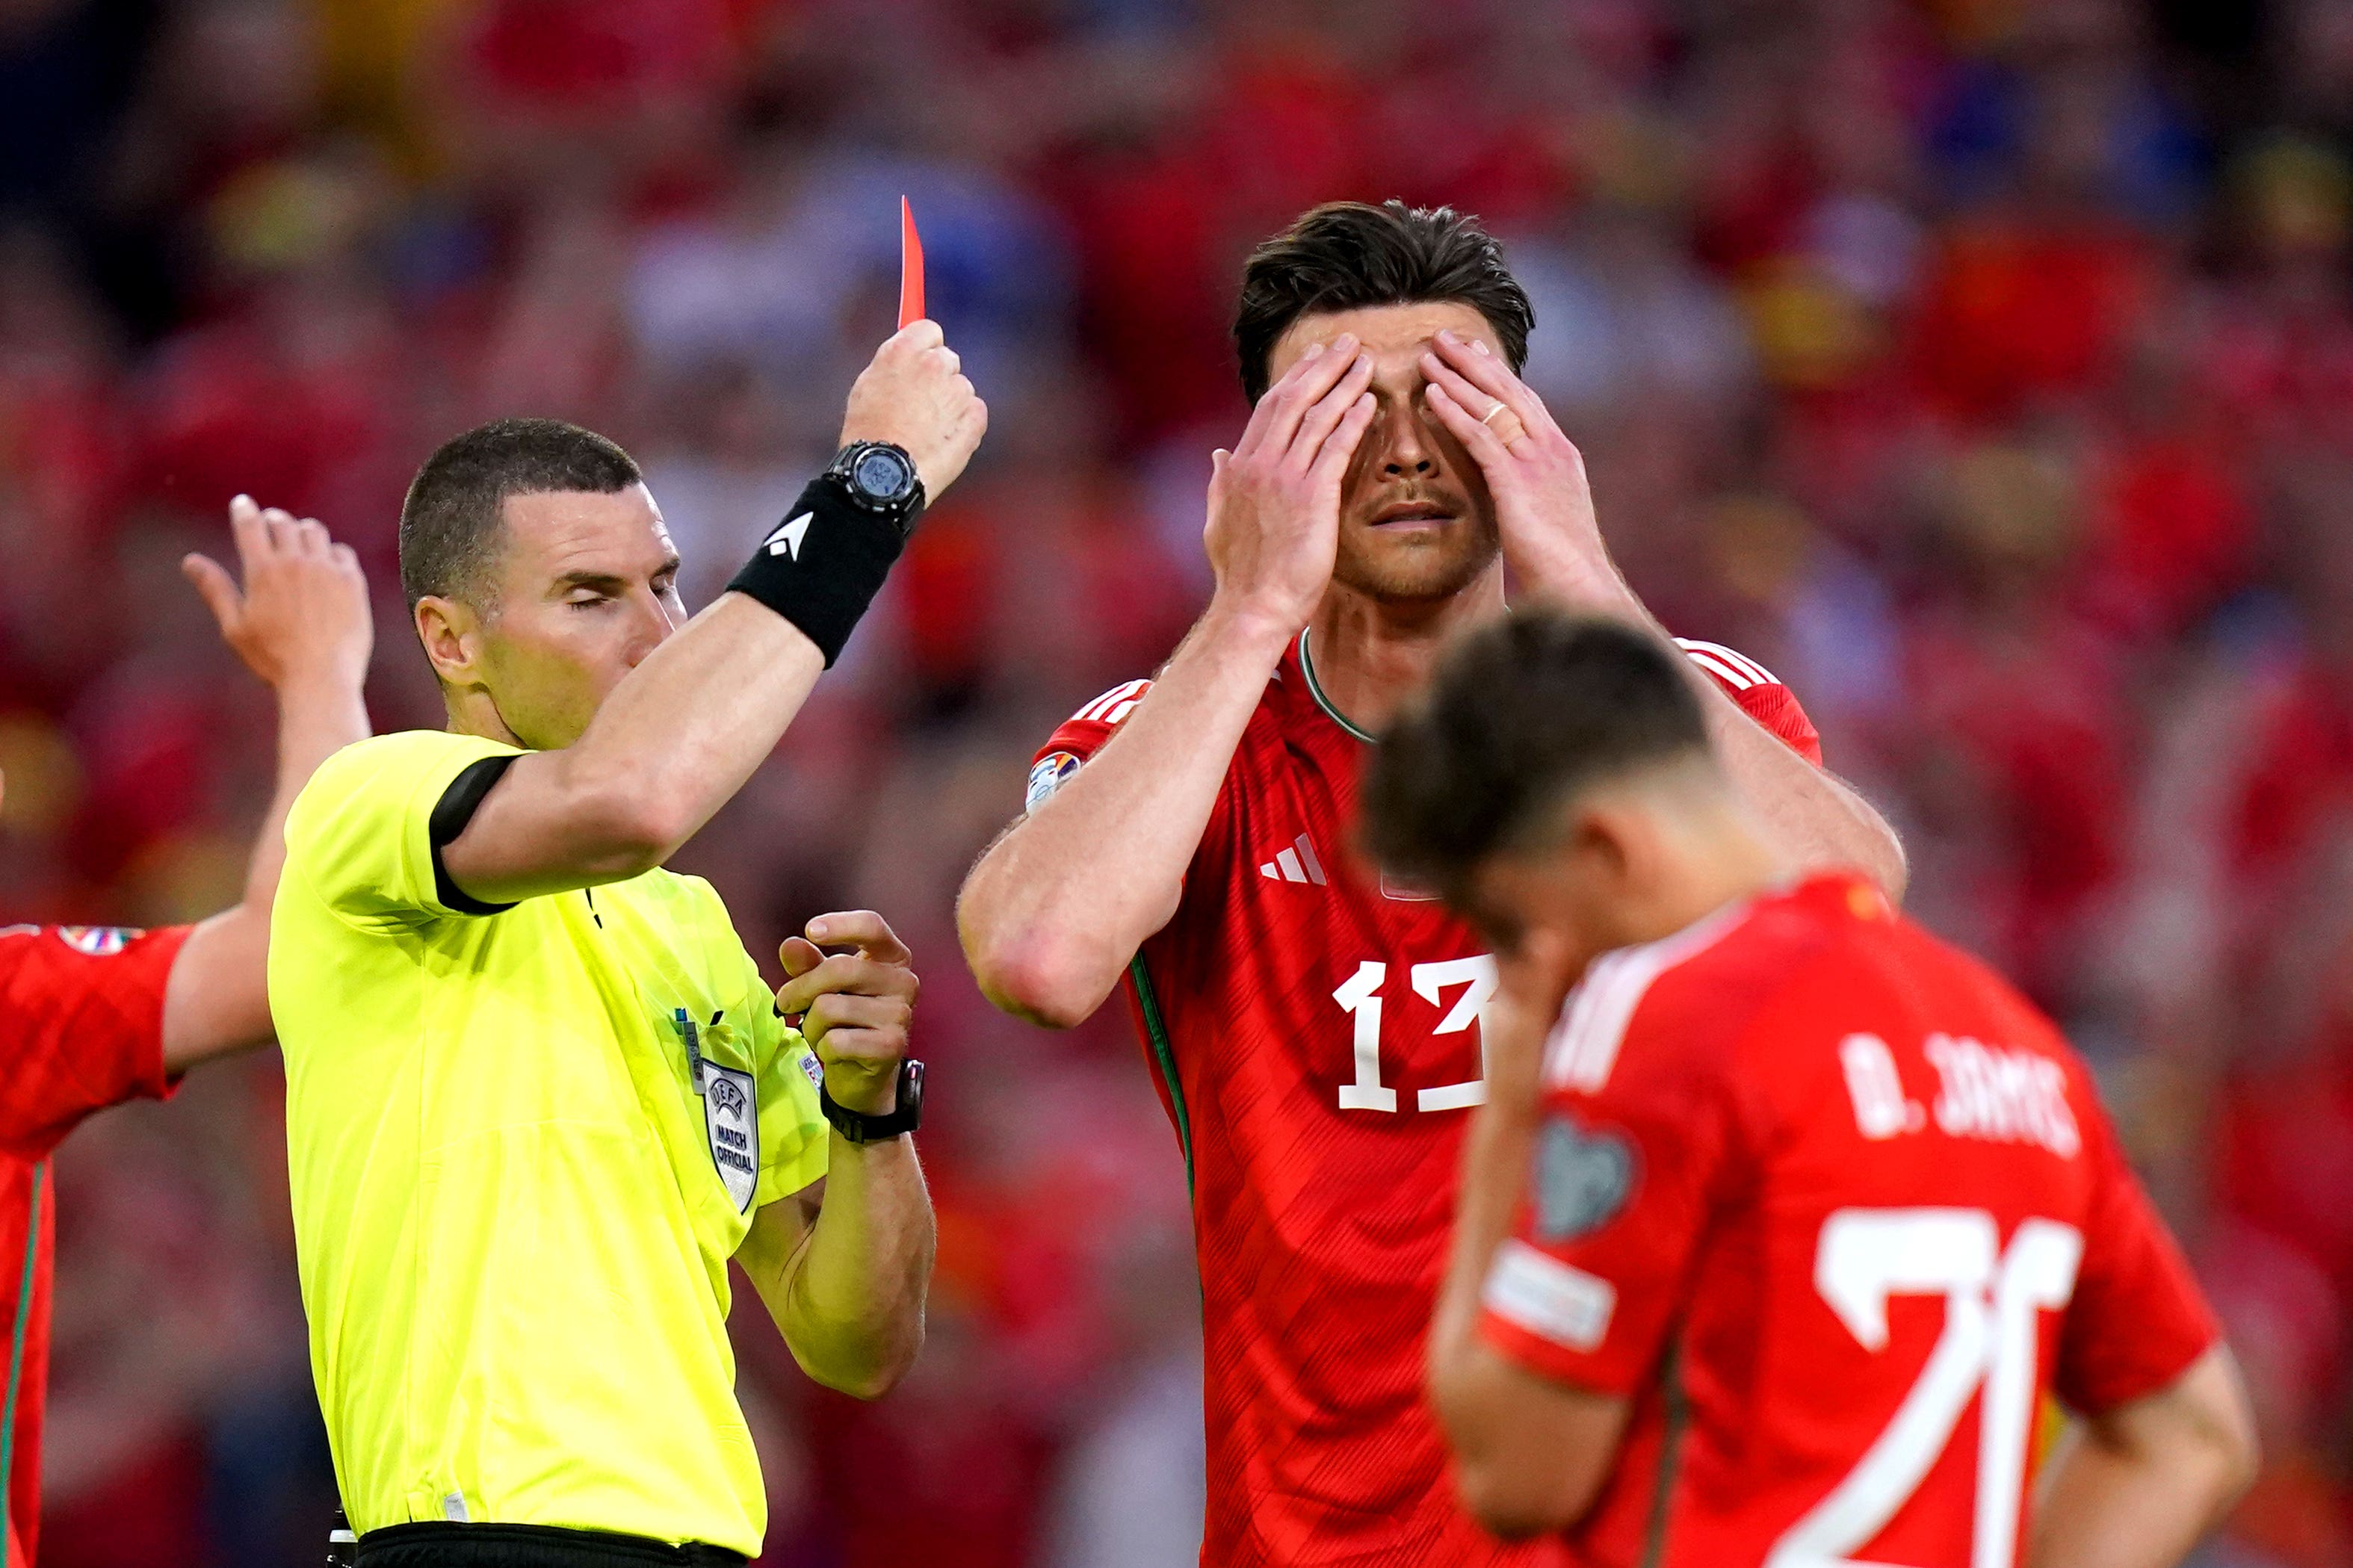 Kieffer Moore was sent off as Wales slipped to a bad defeat